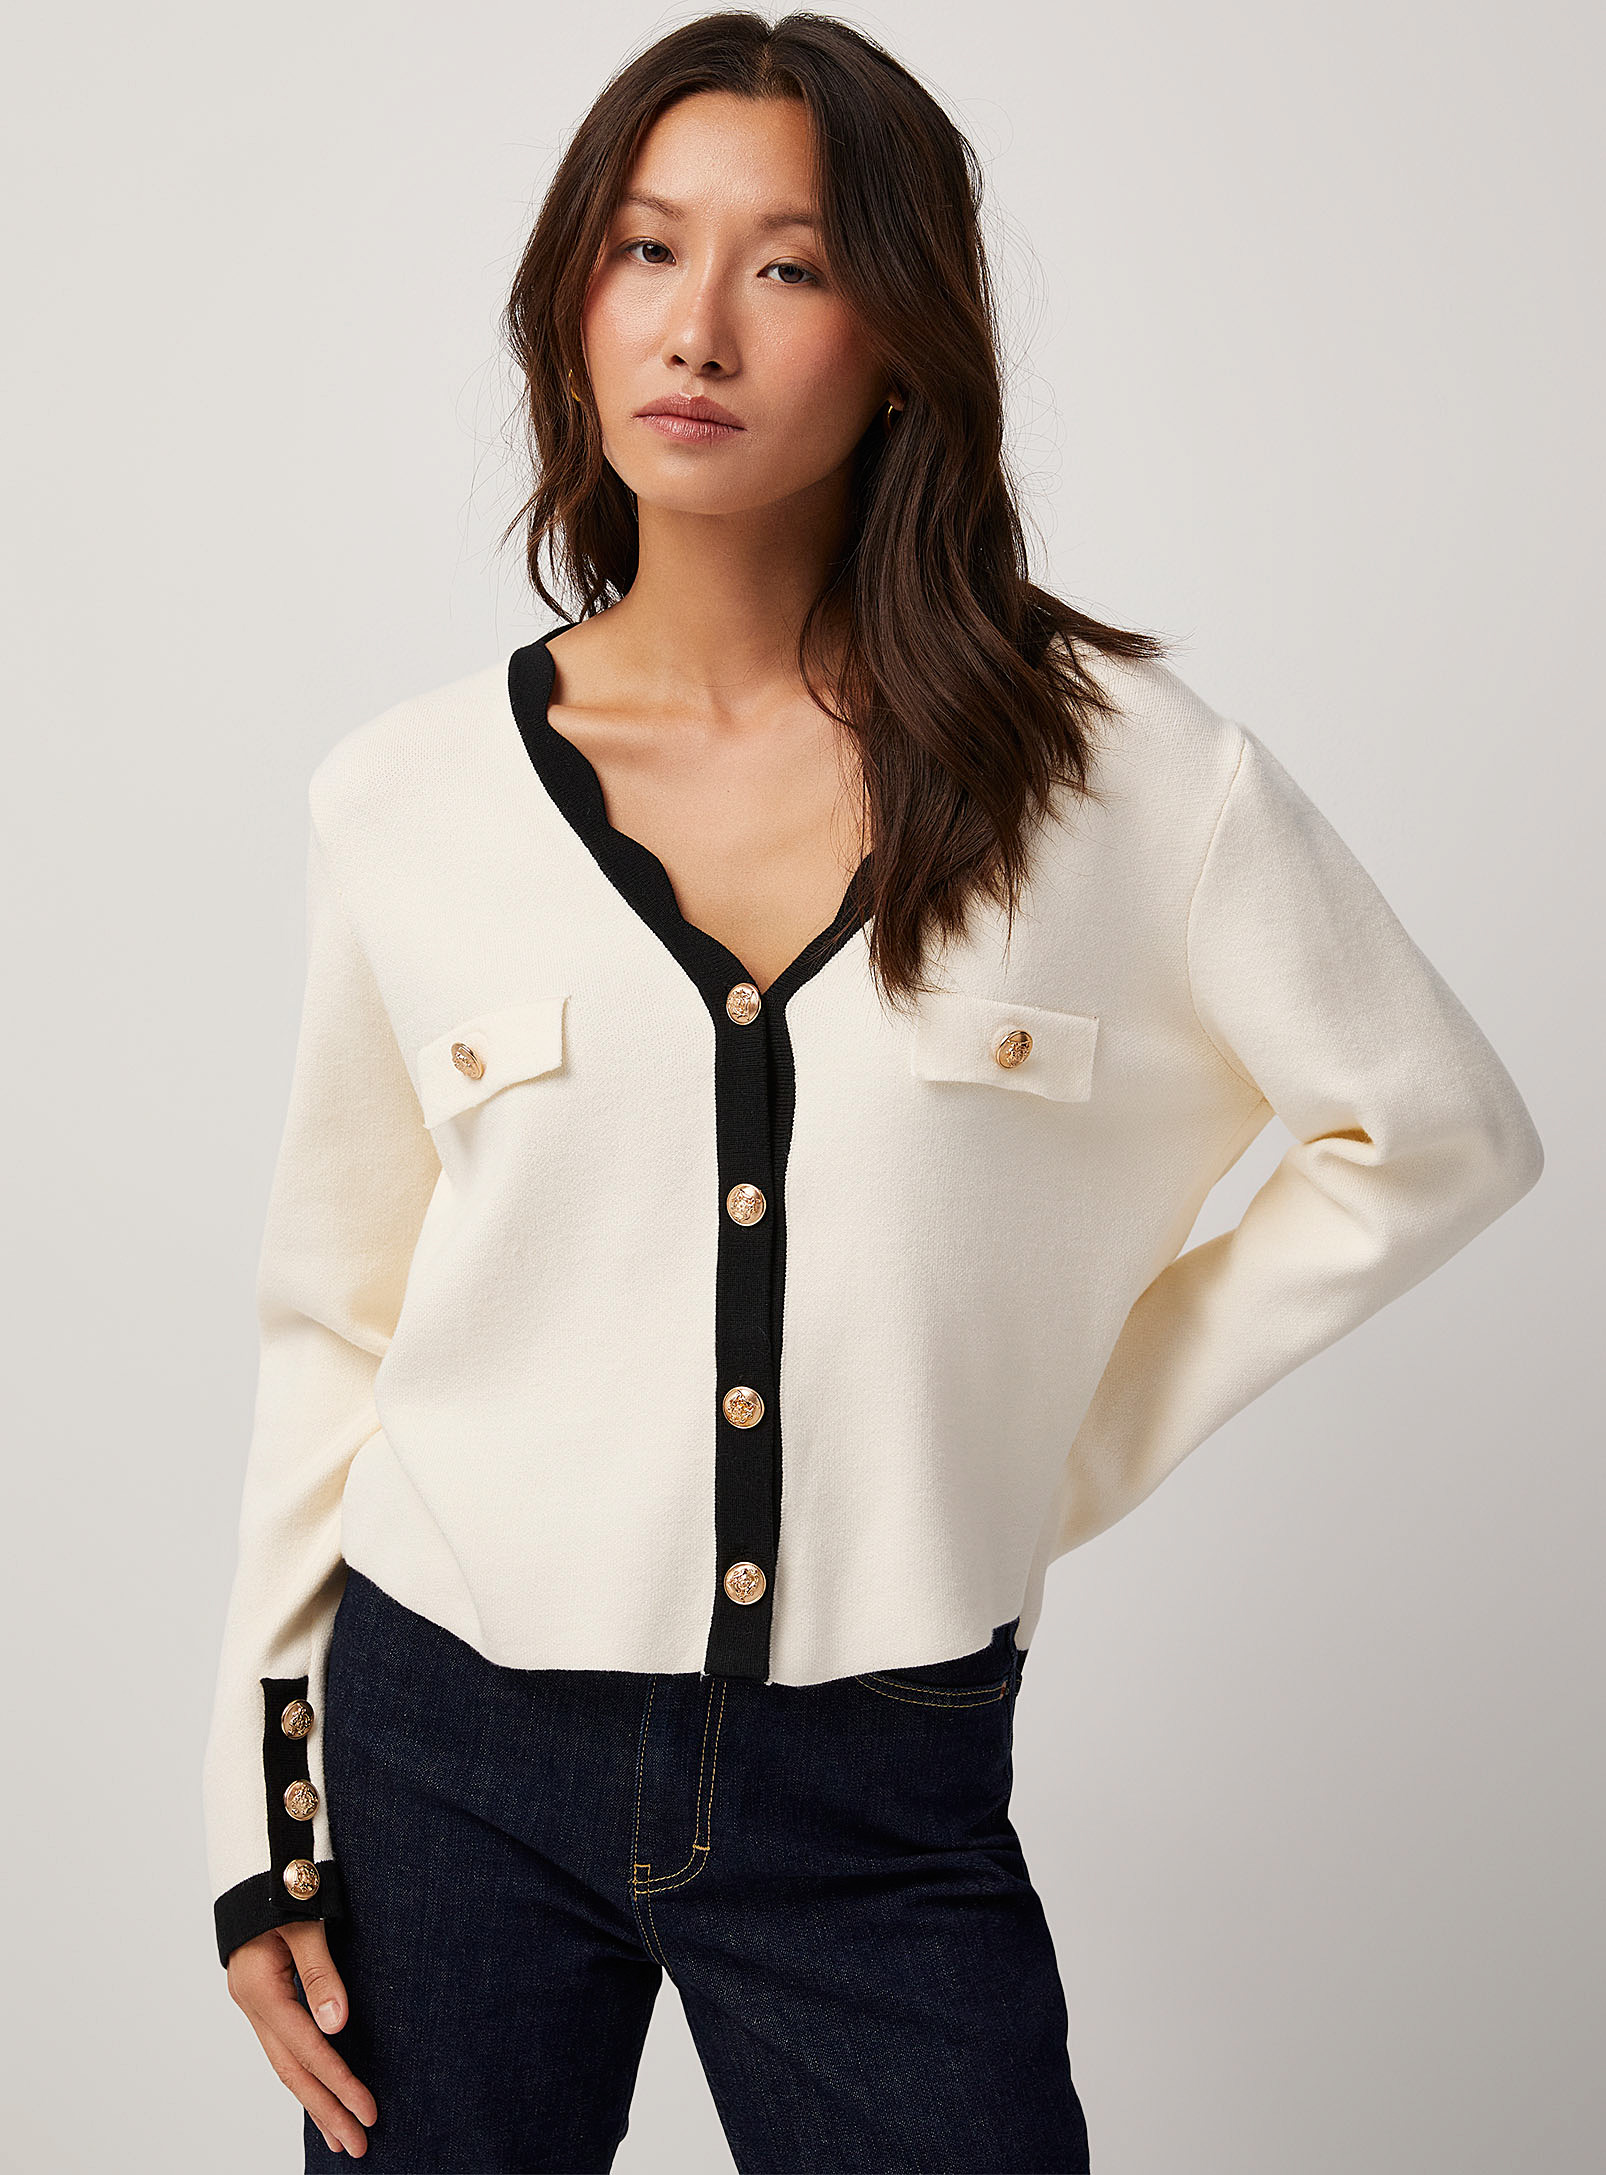 Contemporaine - Women's Scalloped contrasts buttoned Cardigan Sweater